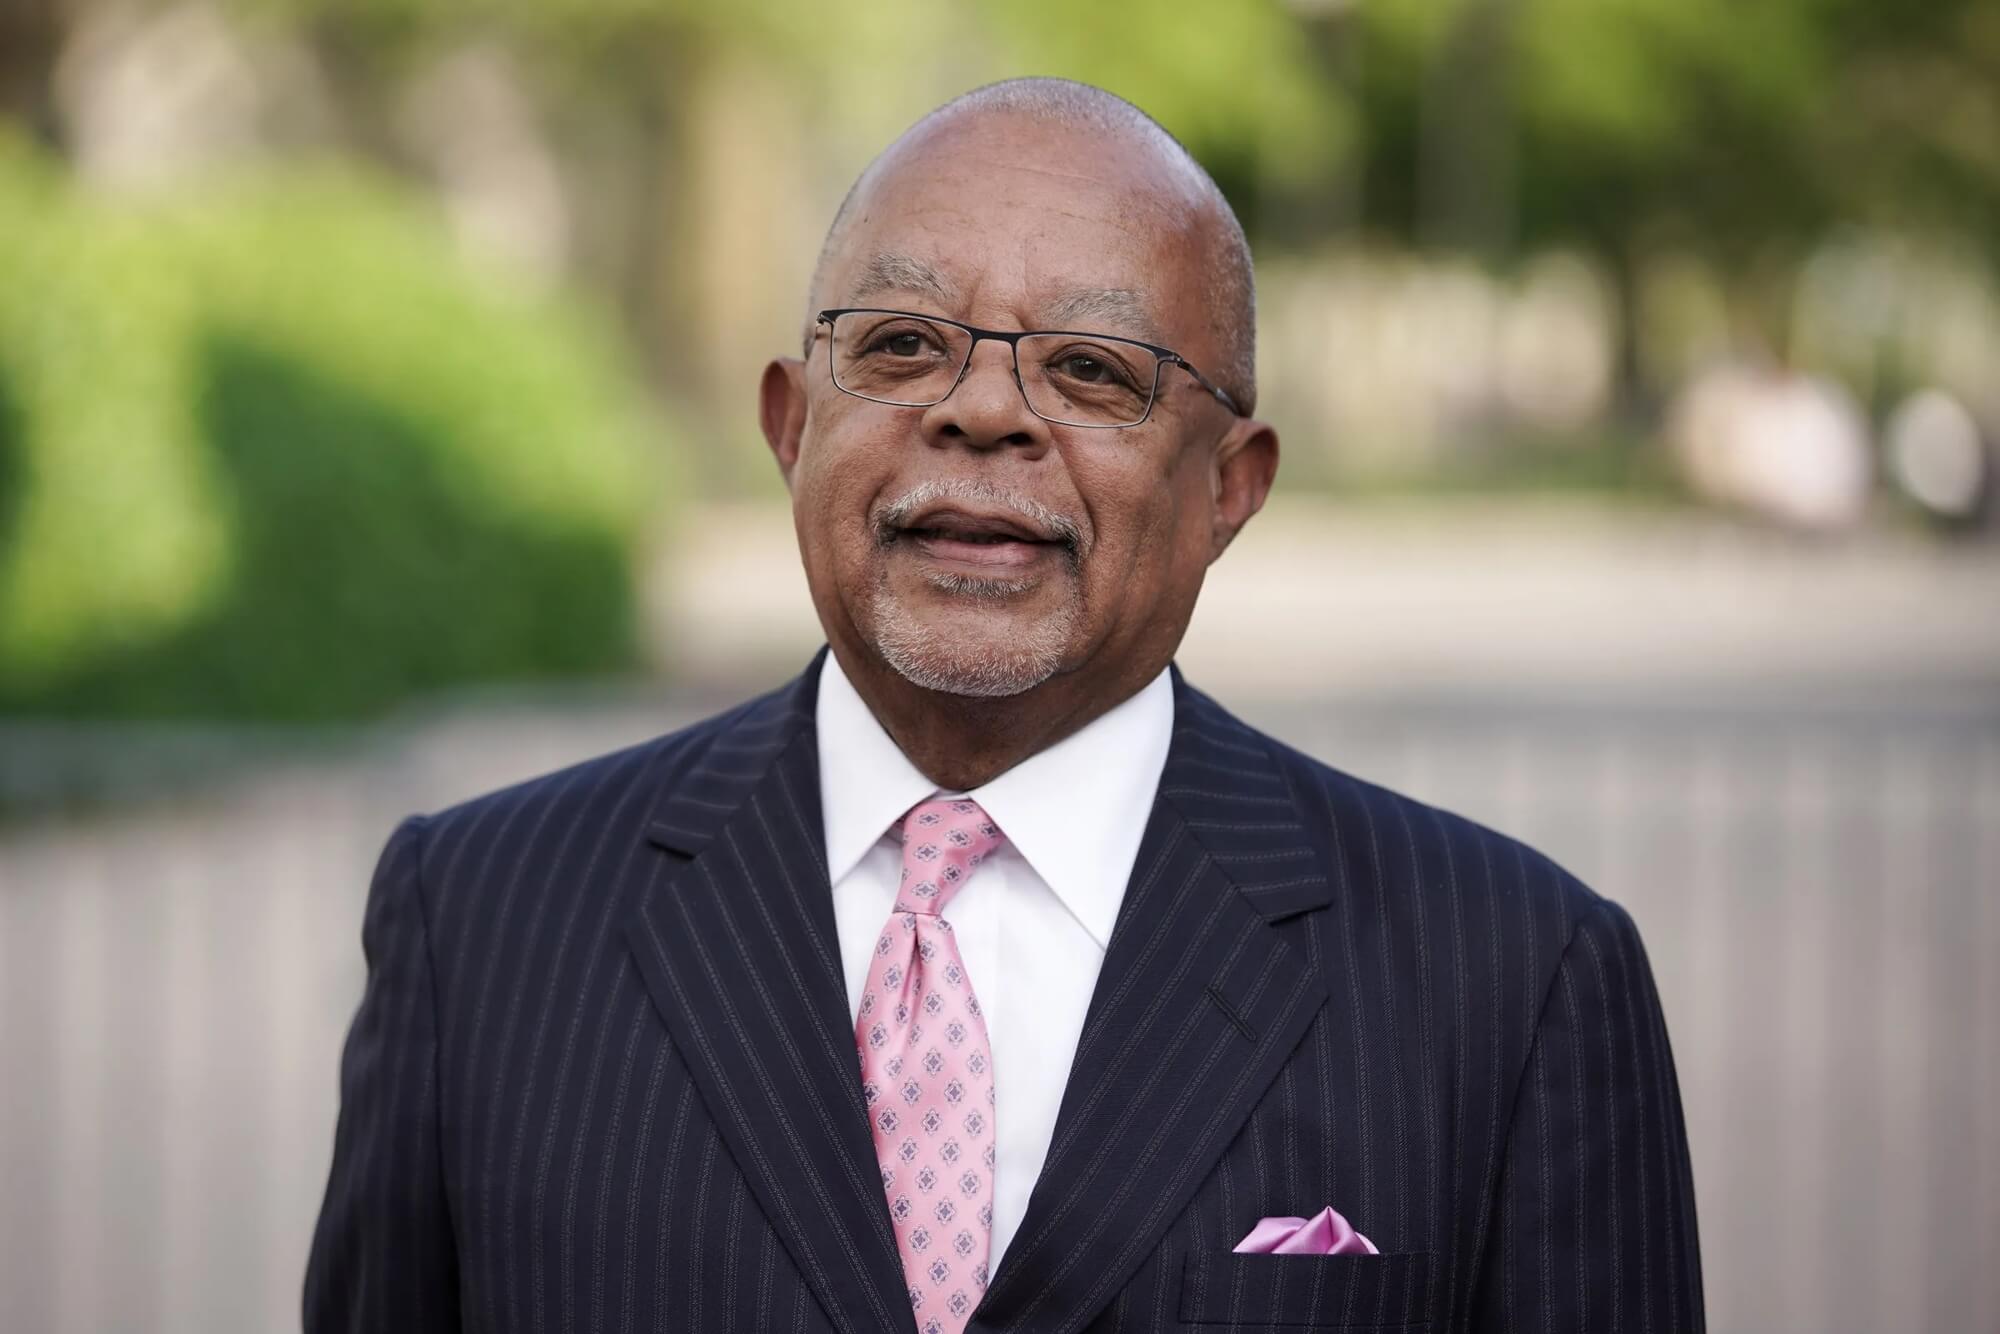 16 Intriguing Facts About Henry Louis Gates, Jr. - Facts.net